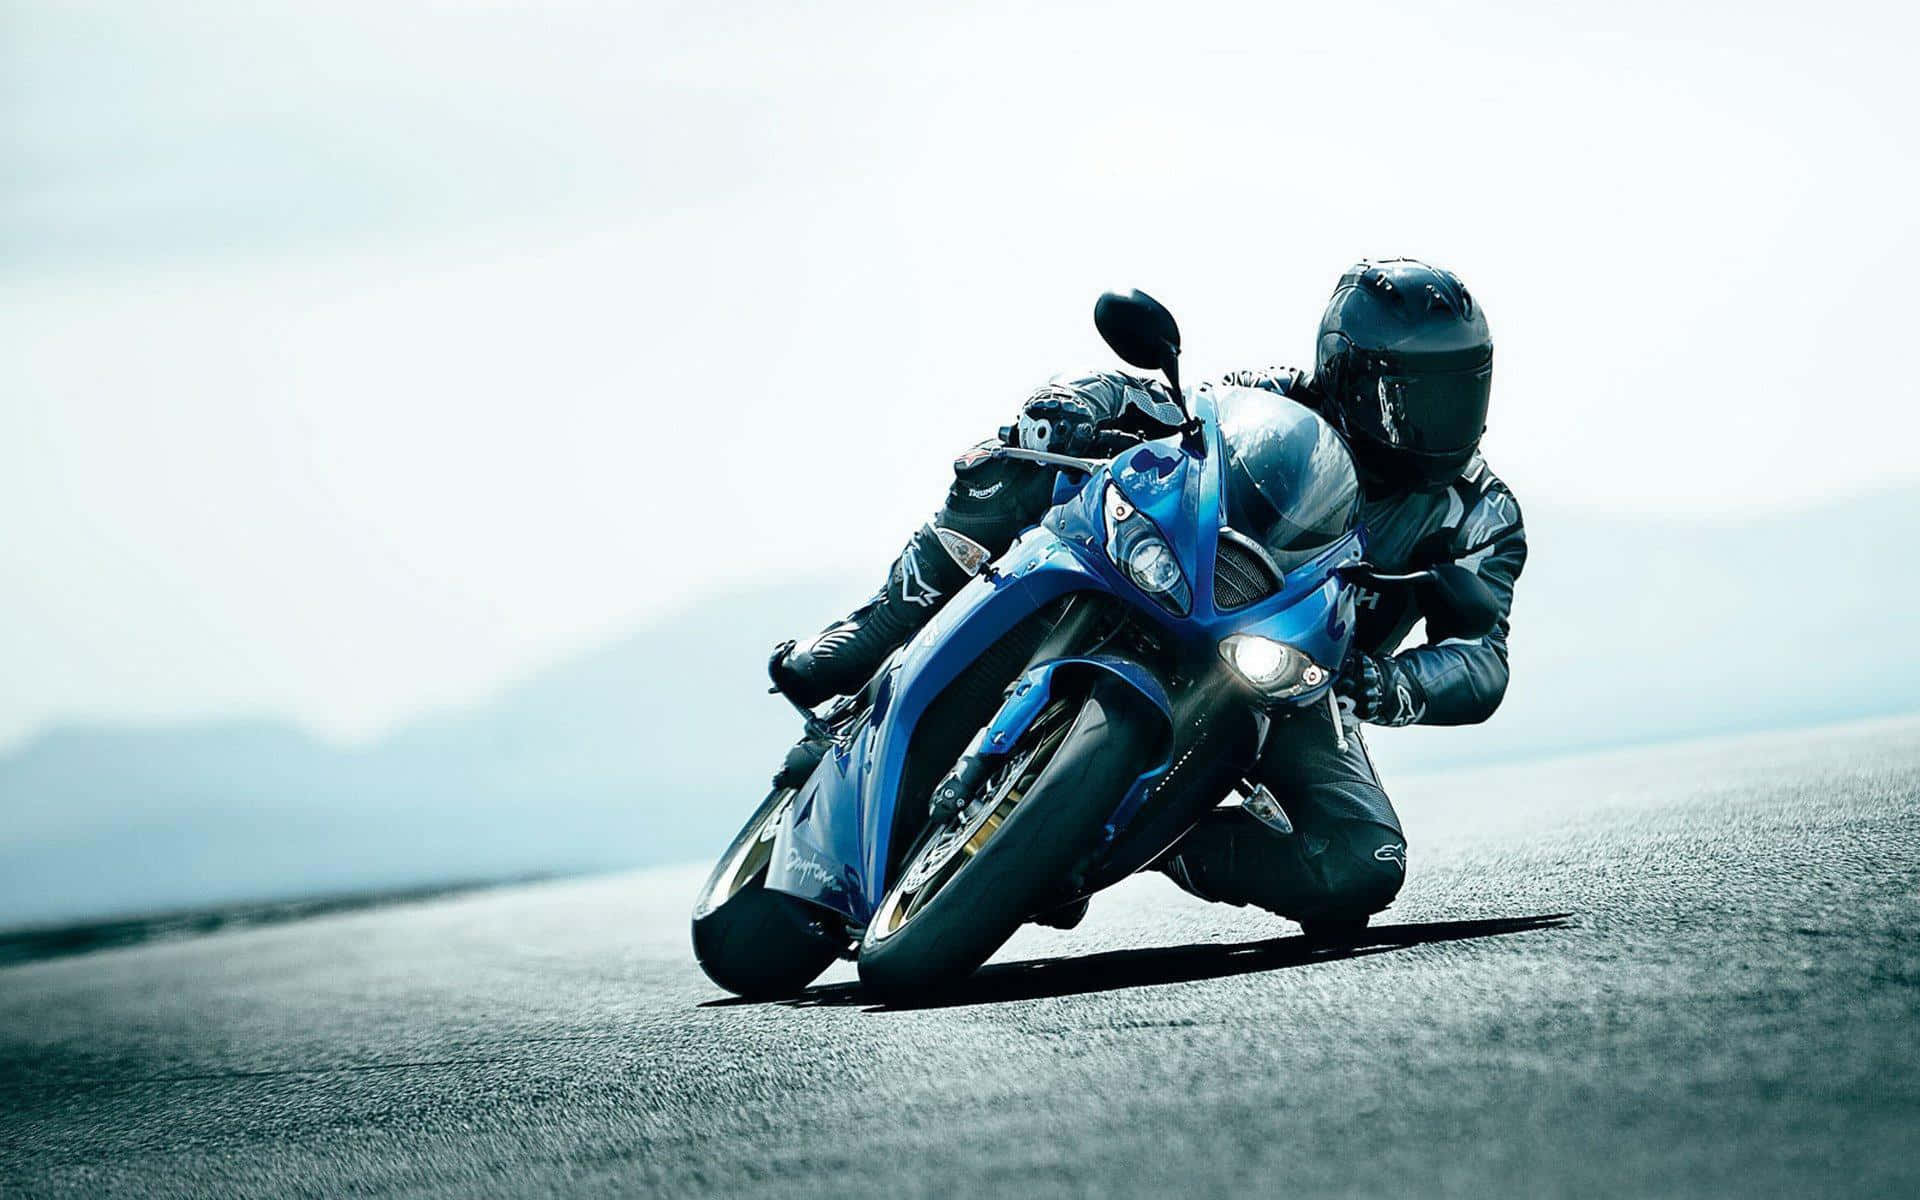 Feel The Freedom of The Open Road On An Hd Motorcycle Wallpaper